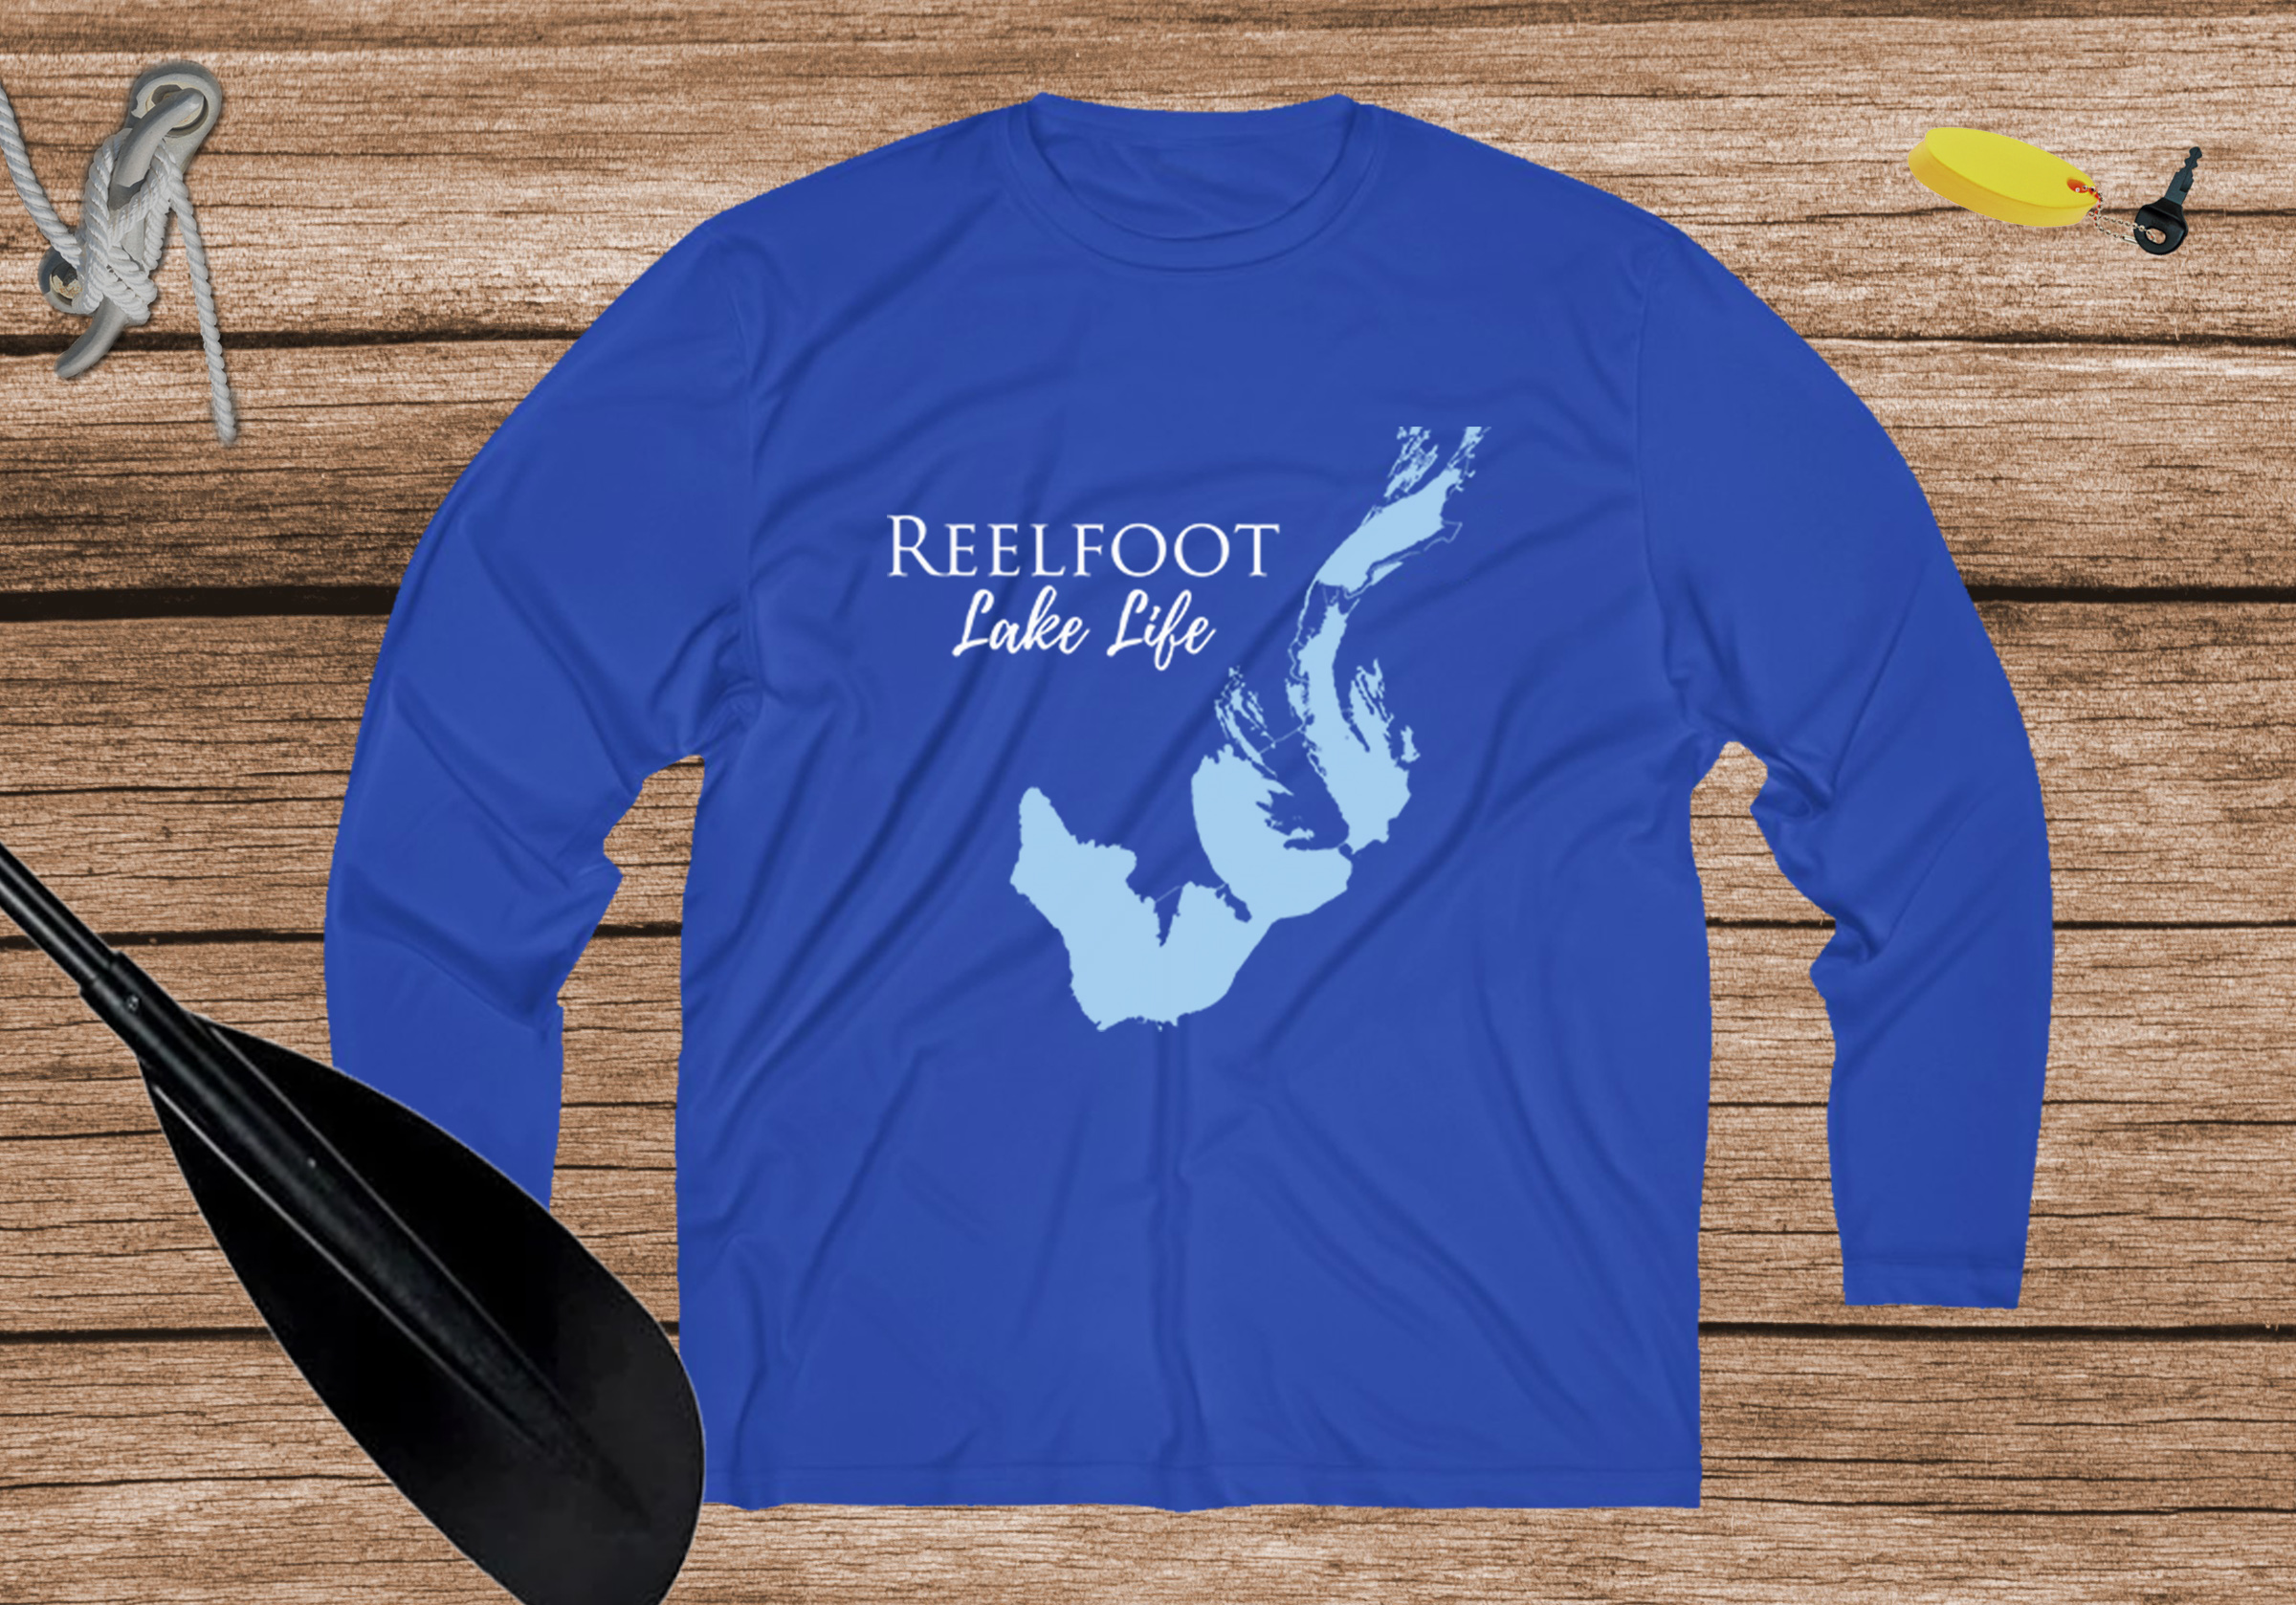 Reelfoot Lake Life Dri-fit Boating Shirt - Breathable Material- Men's Long Sleeve Moisture Wicking Tee - Tennessee Lake